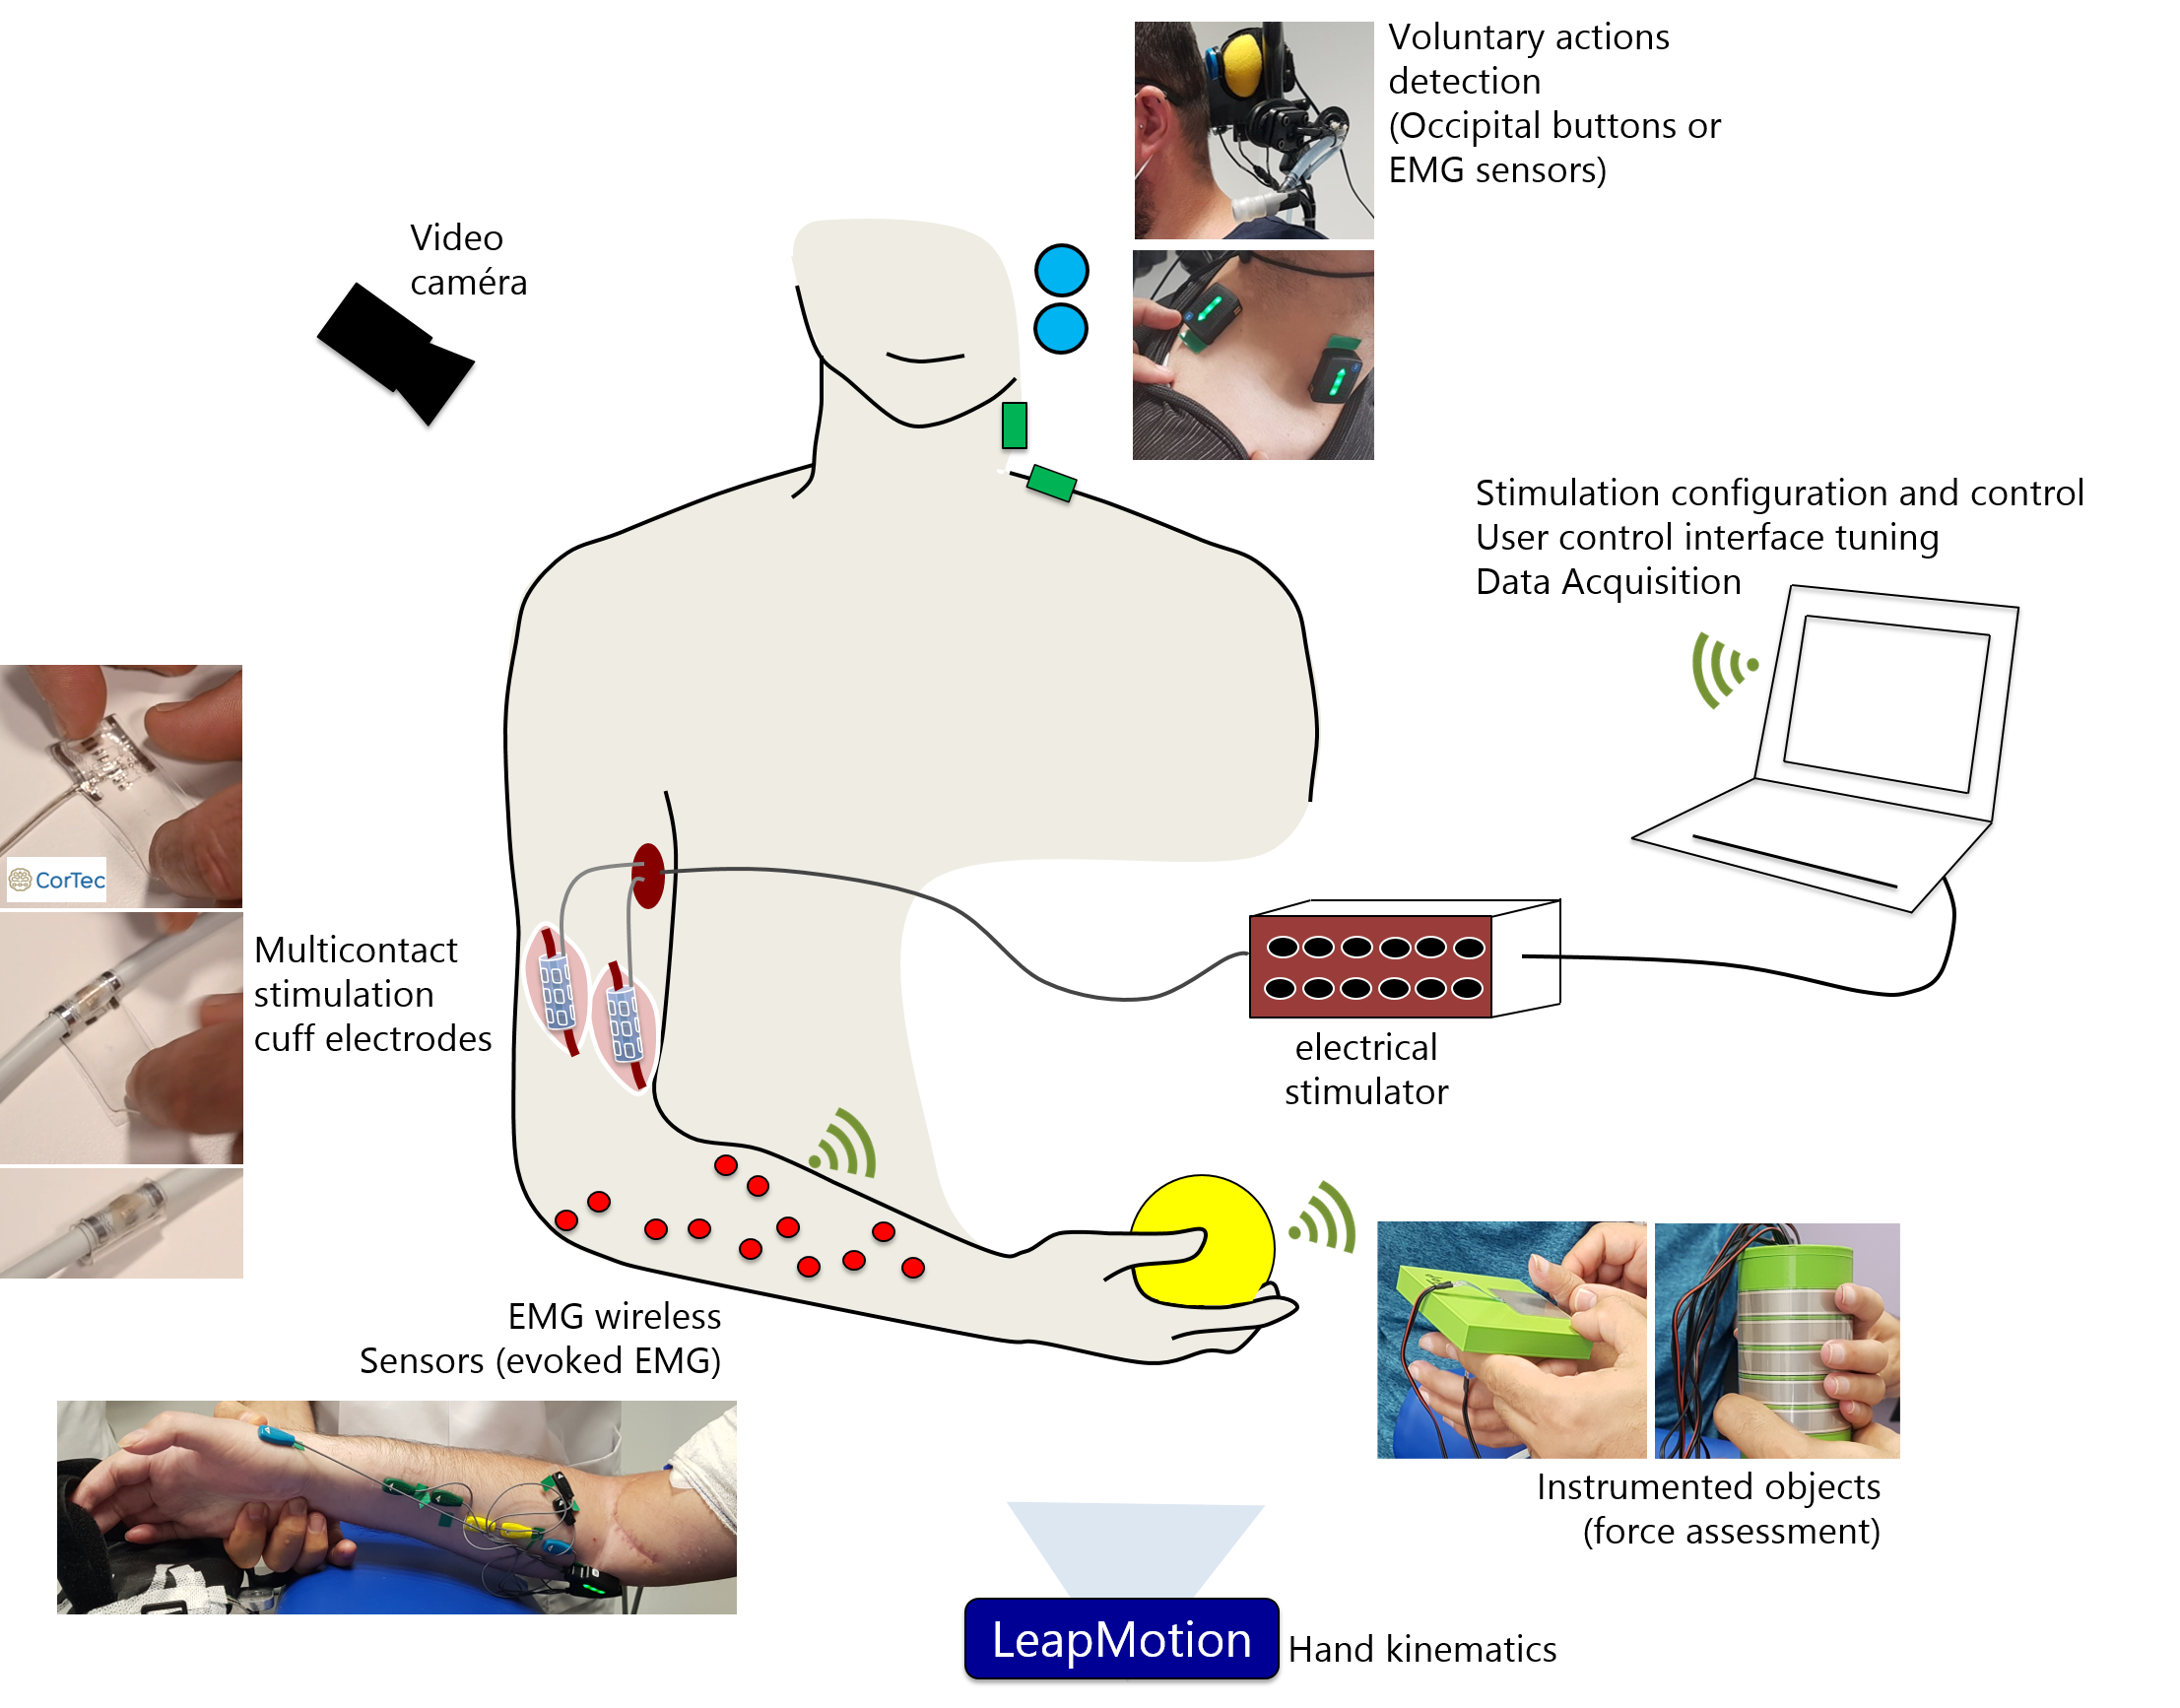 Setup description. An experimental platform was developed to control the stimulation delivered to 2 neural cuff electrodes implanted around the median and radial nerves. Evoked electromyography, video, evoked movement kinematics and grasping forces were recorded. The participants used voluntary muscle contractions or occipital buttons to trigger different stimulation configuration.